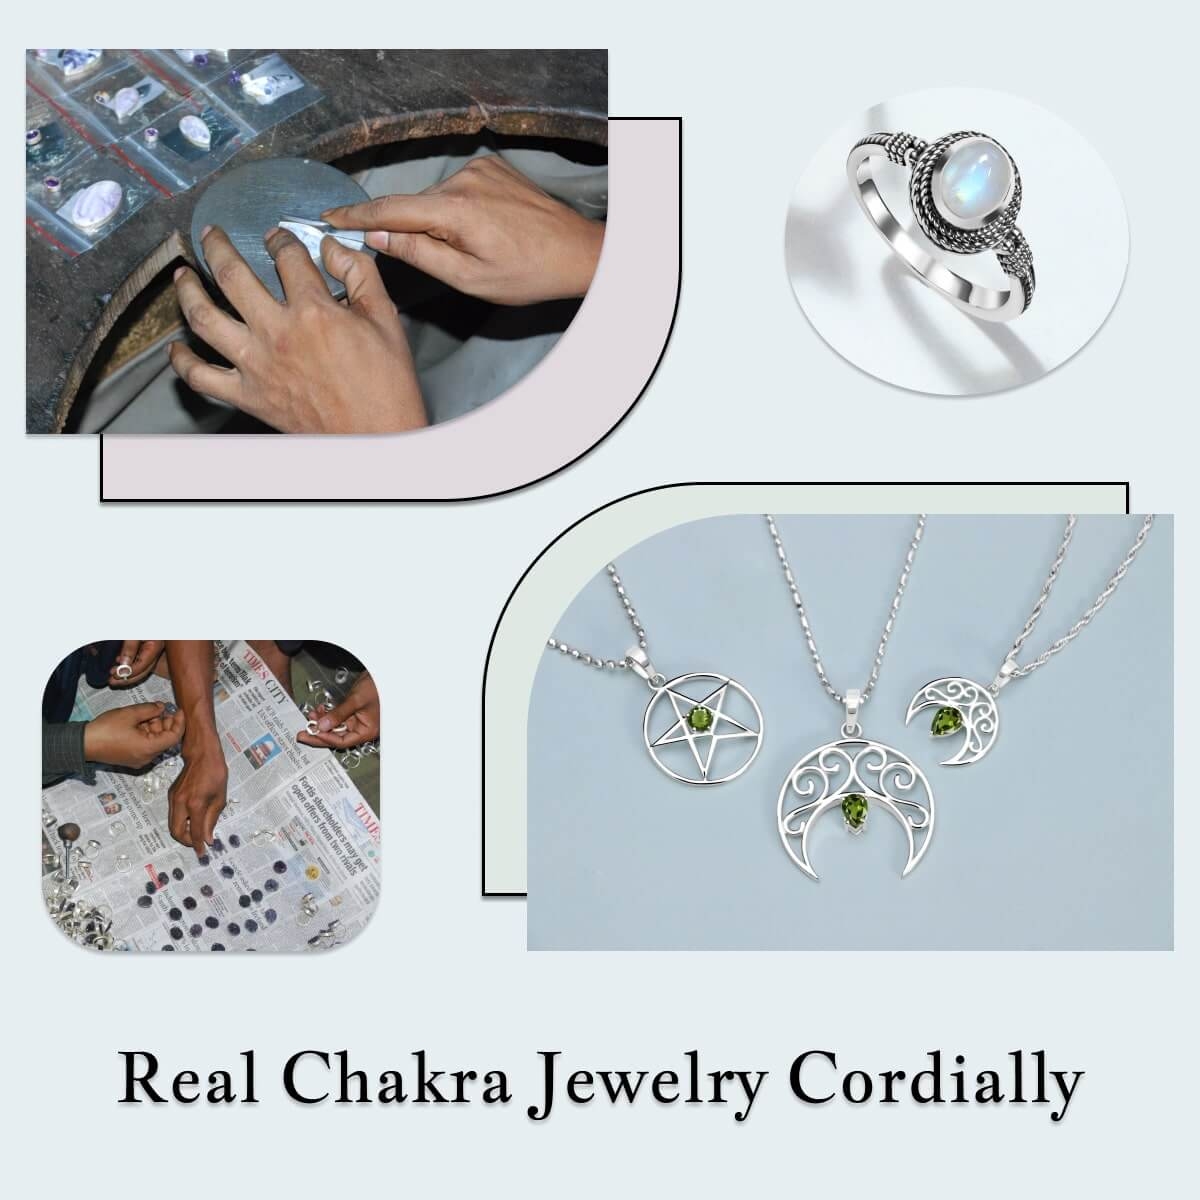 Bring Real Chakra Jewelry 'One For Your Stars'